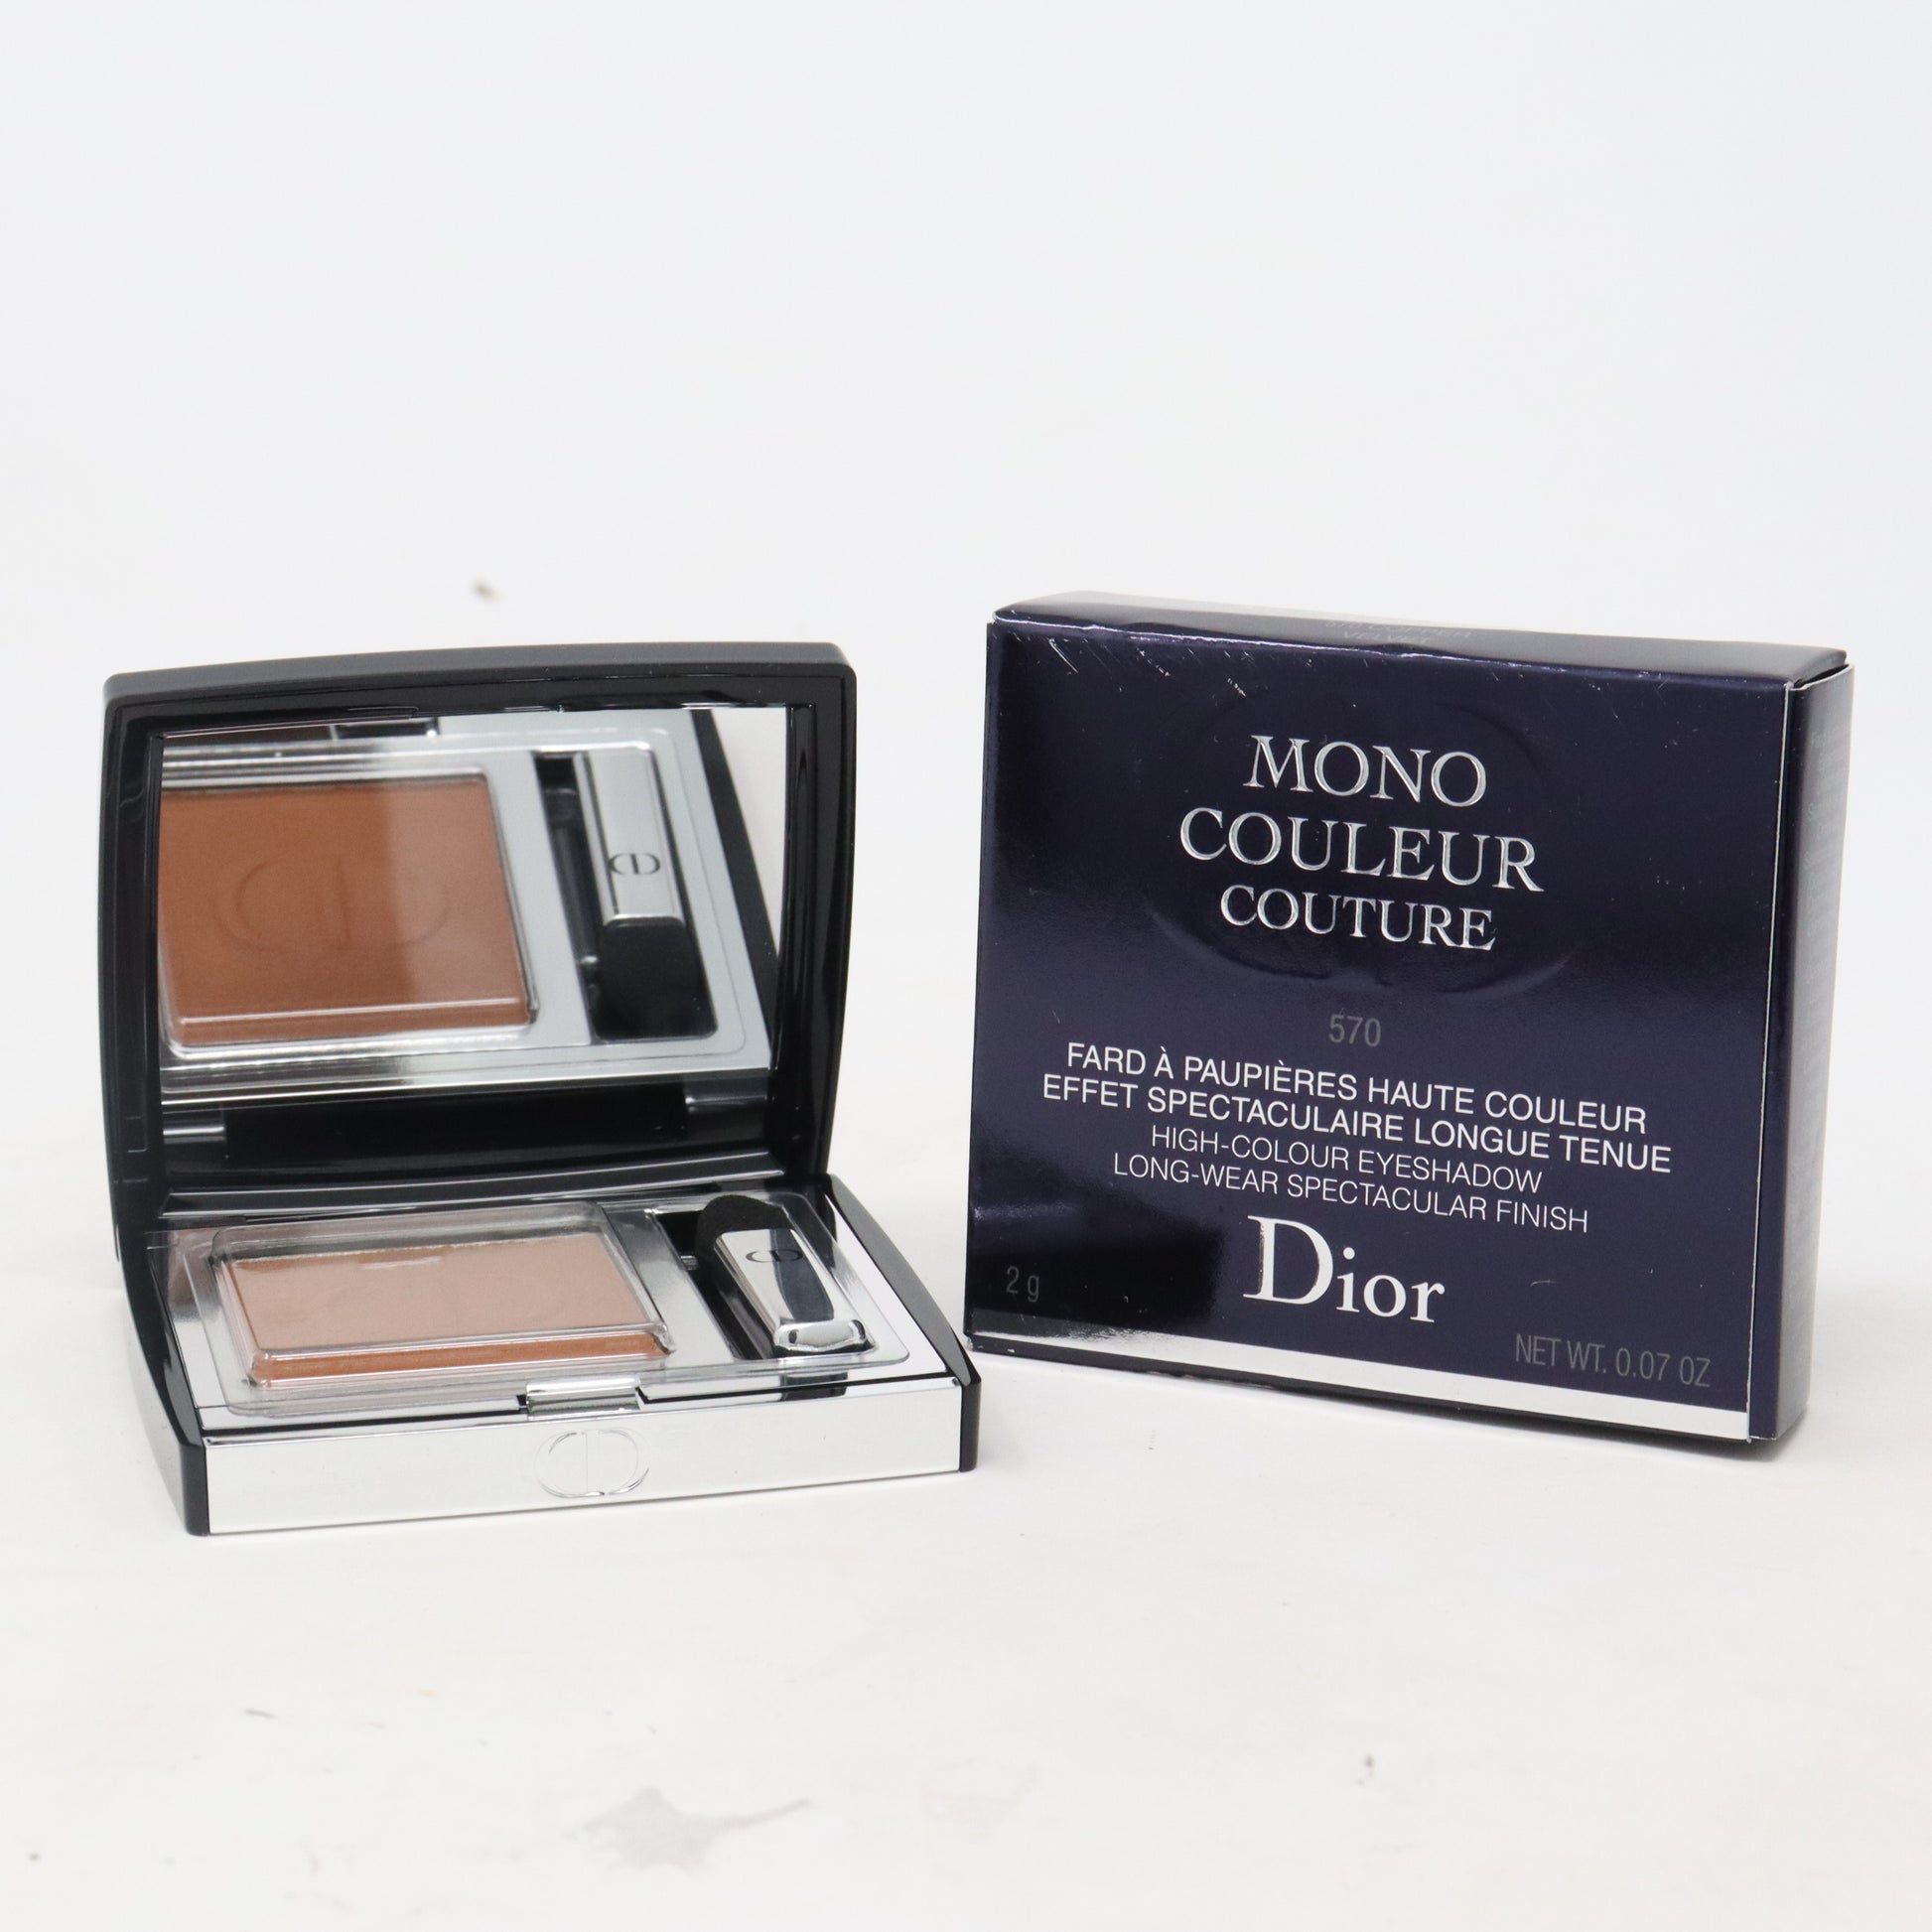 Mono Couleur Couture Eyeshadow 2 g